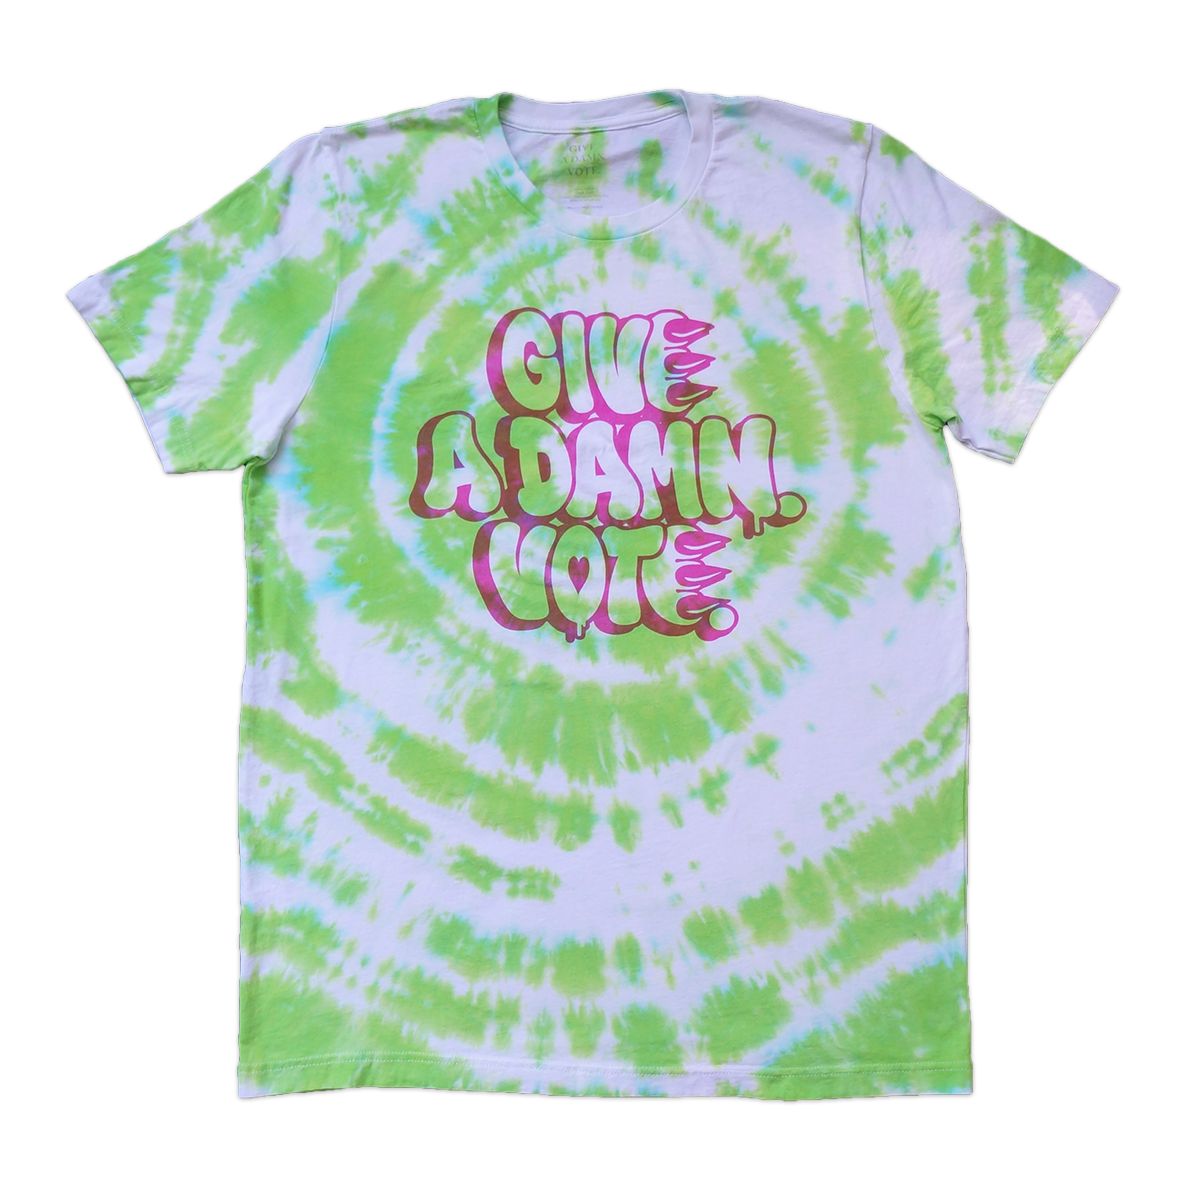 Copy of GIVE A DAMN VOTE X CLAW GREEN & PINK TIE DYE TEE